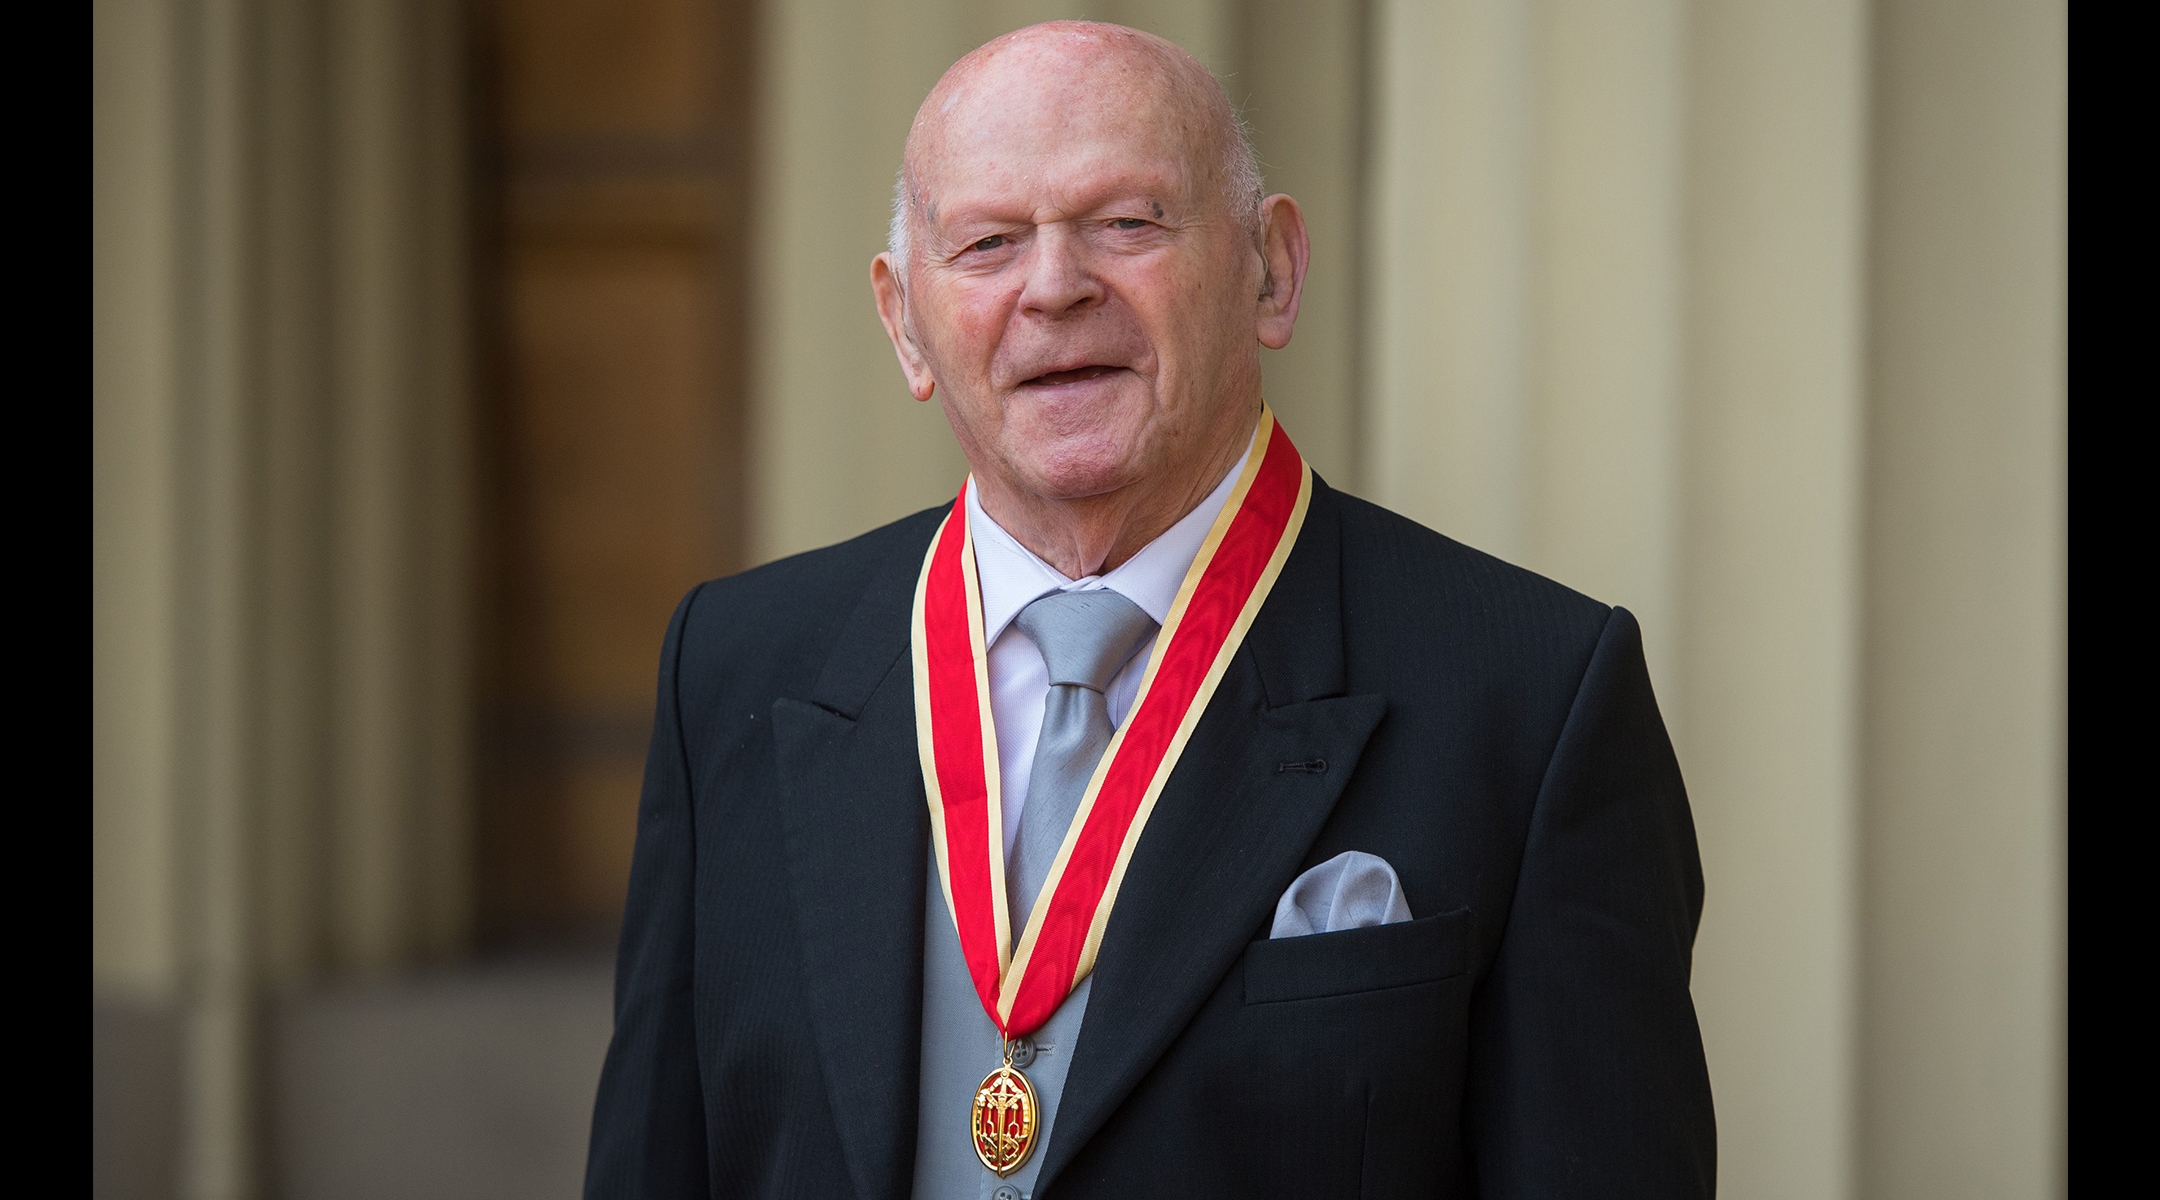 Ben Helfgott poses with his medal after being knighted at Buckingham Palace, Nov. 21, 2018.(Dominic Lipinski/AFP via Getty Images)